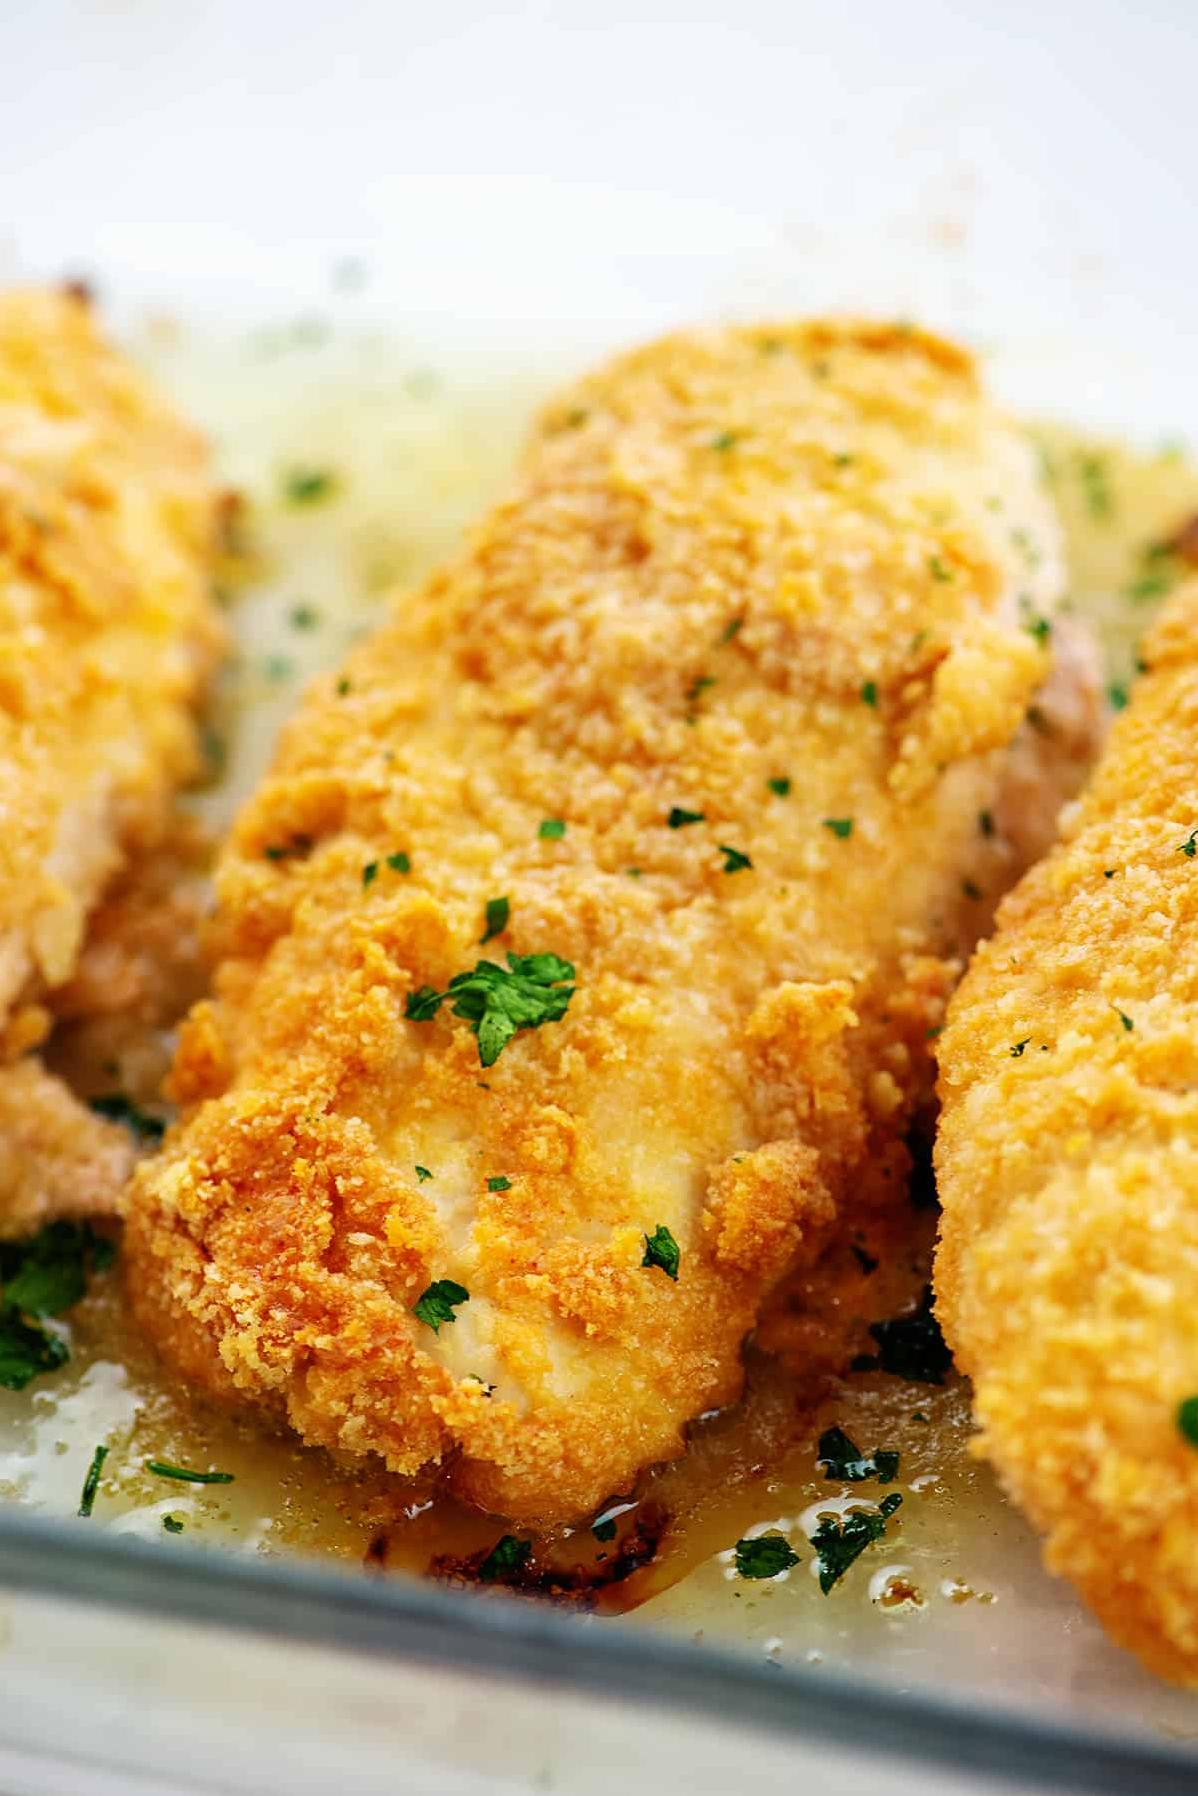  This chicken is soaring to new heights of deliciousness!